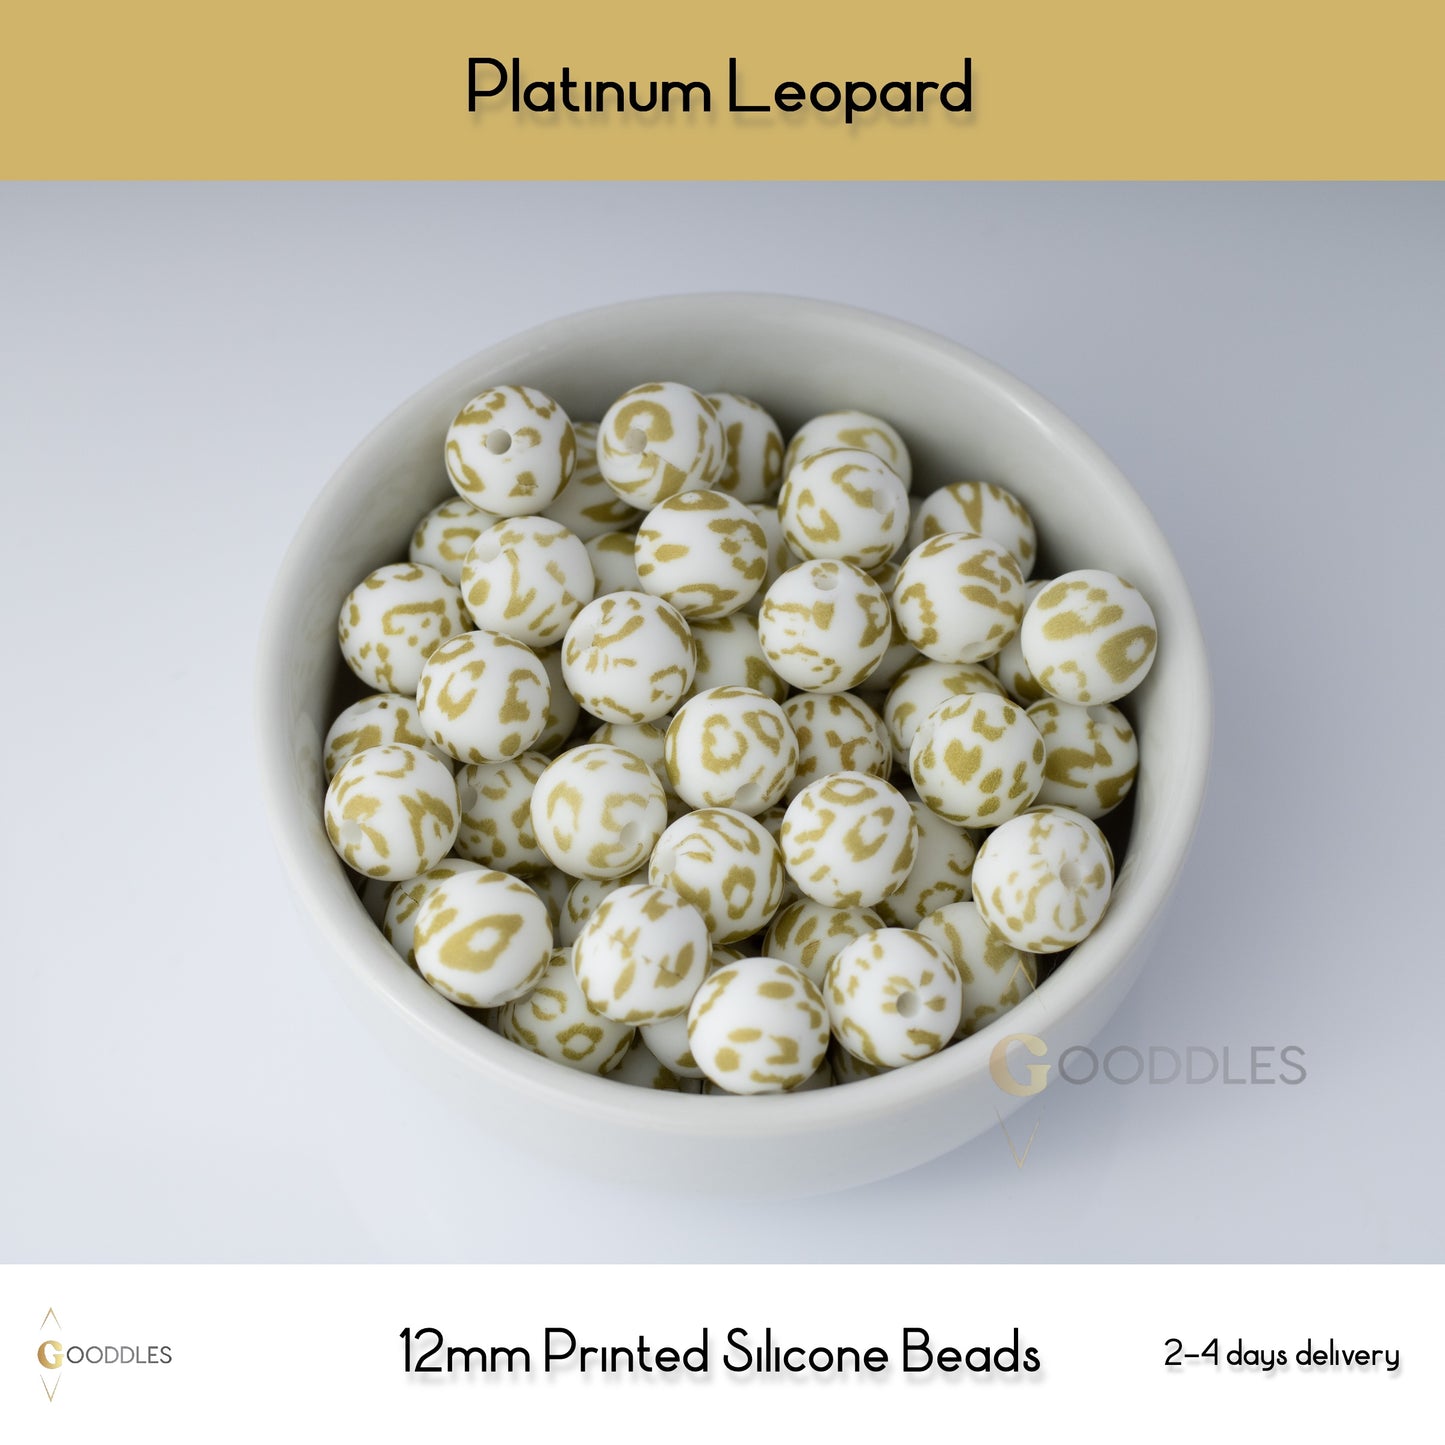 5pcs, Platinum Leopard Silicone Beads Printed Round Silicone Beads